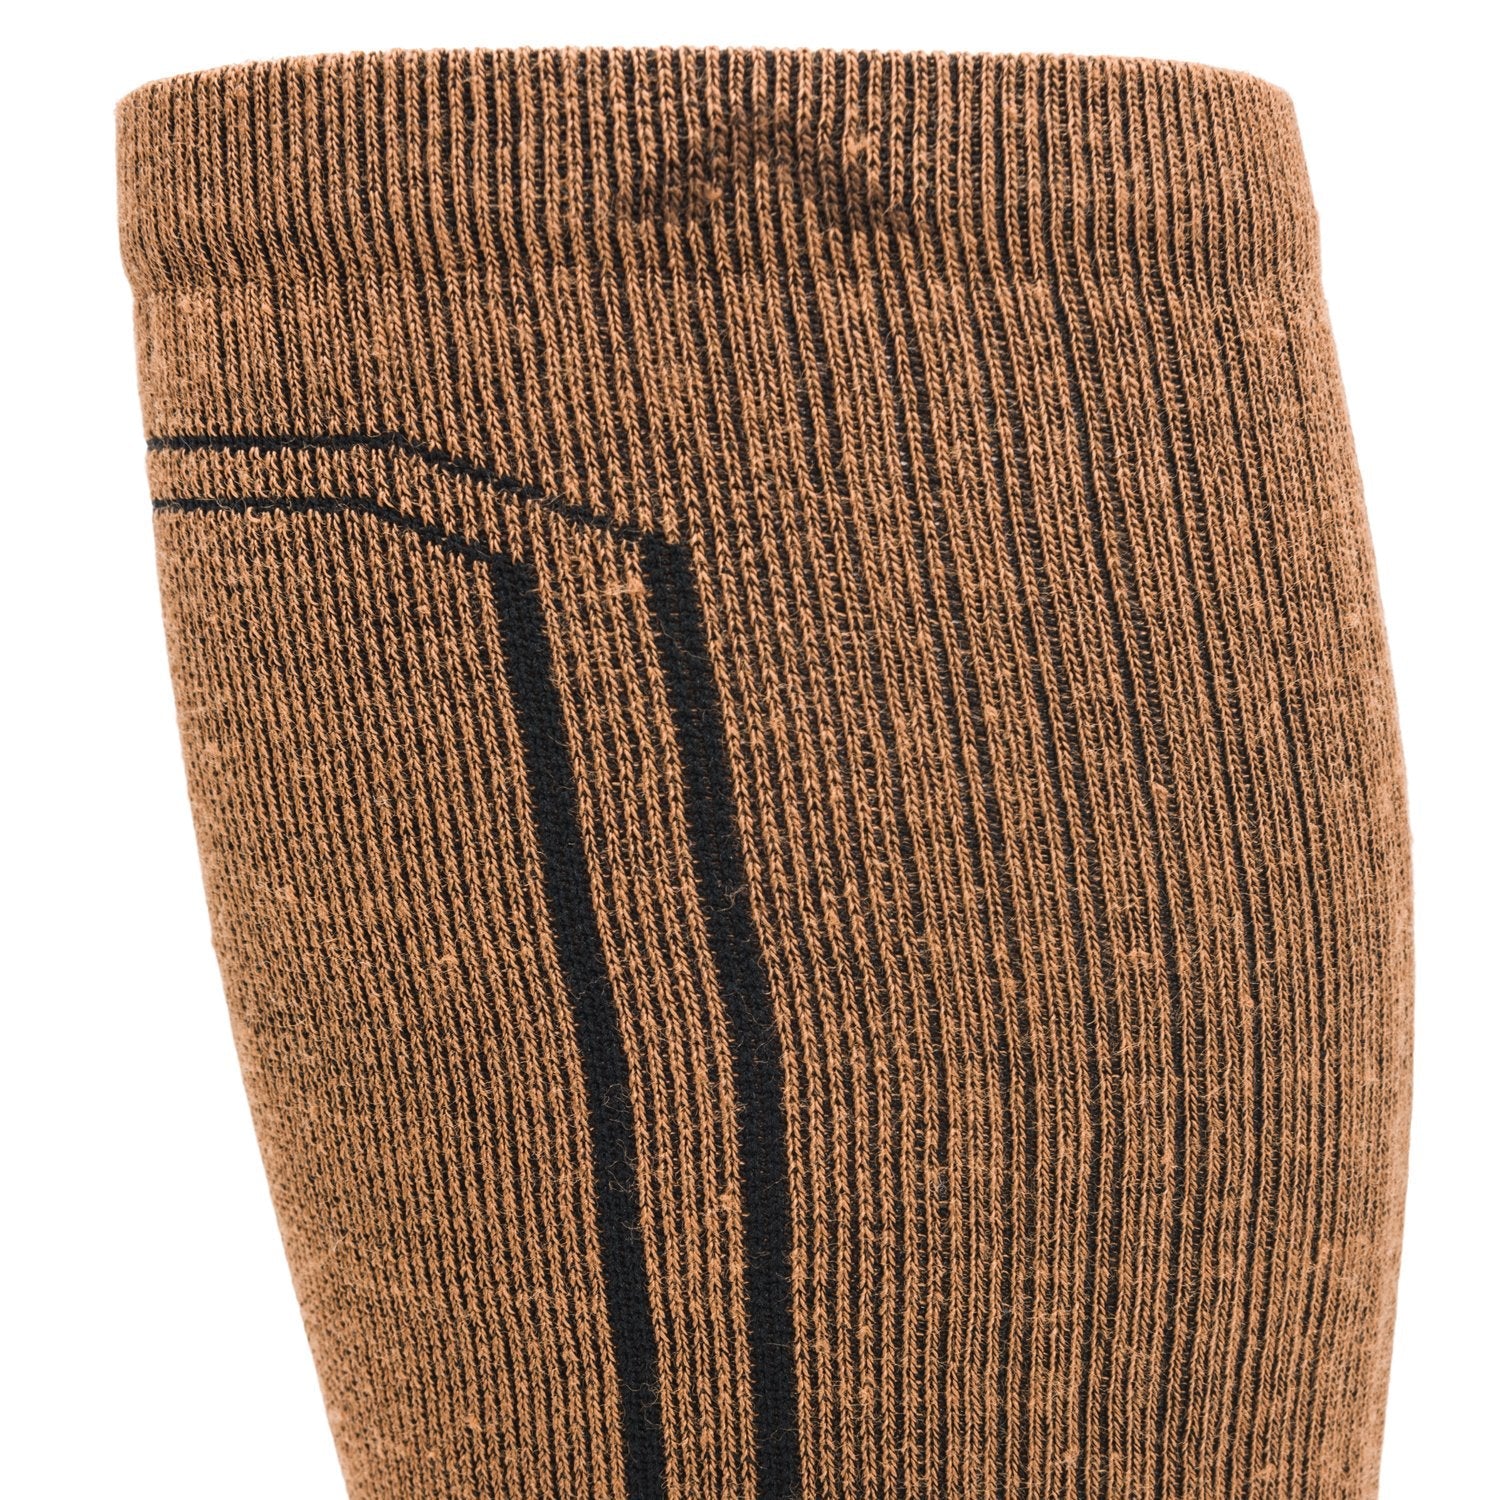 Coyote Brown cuff perspective